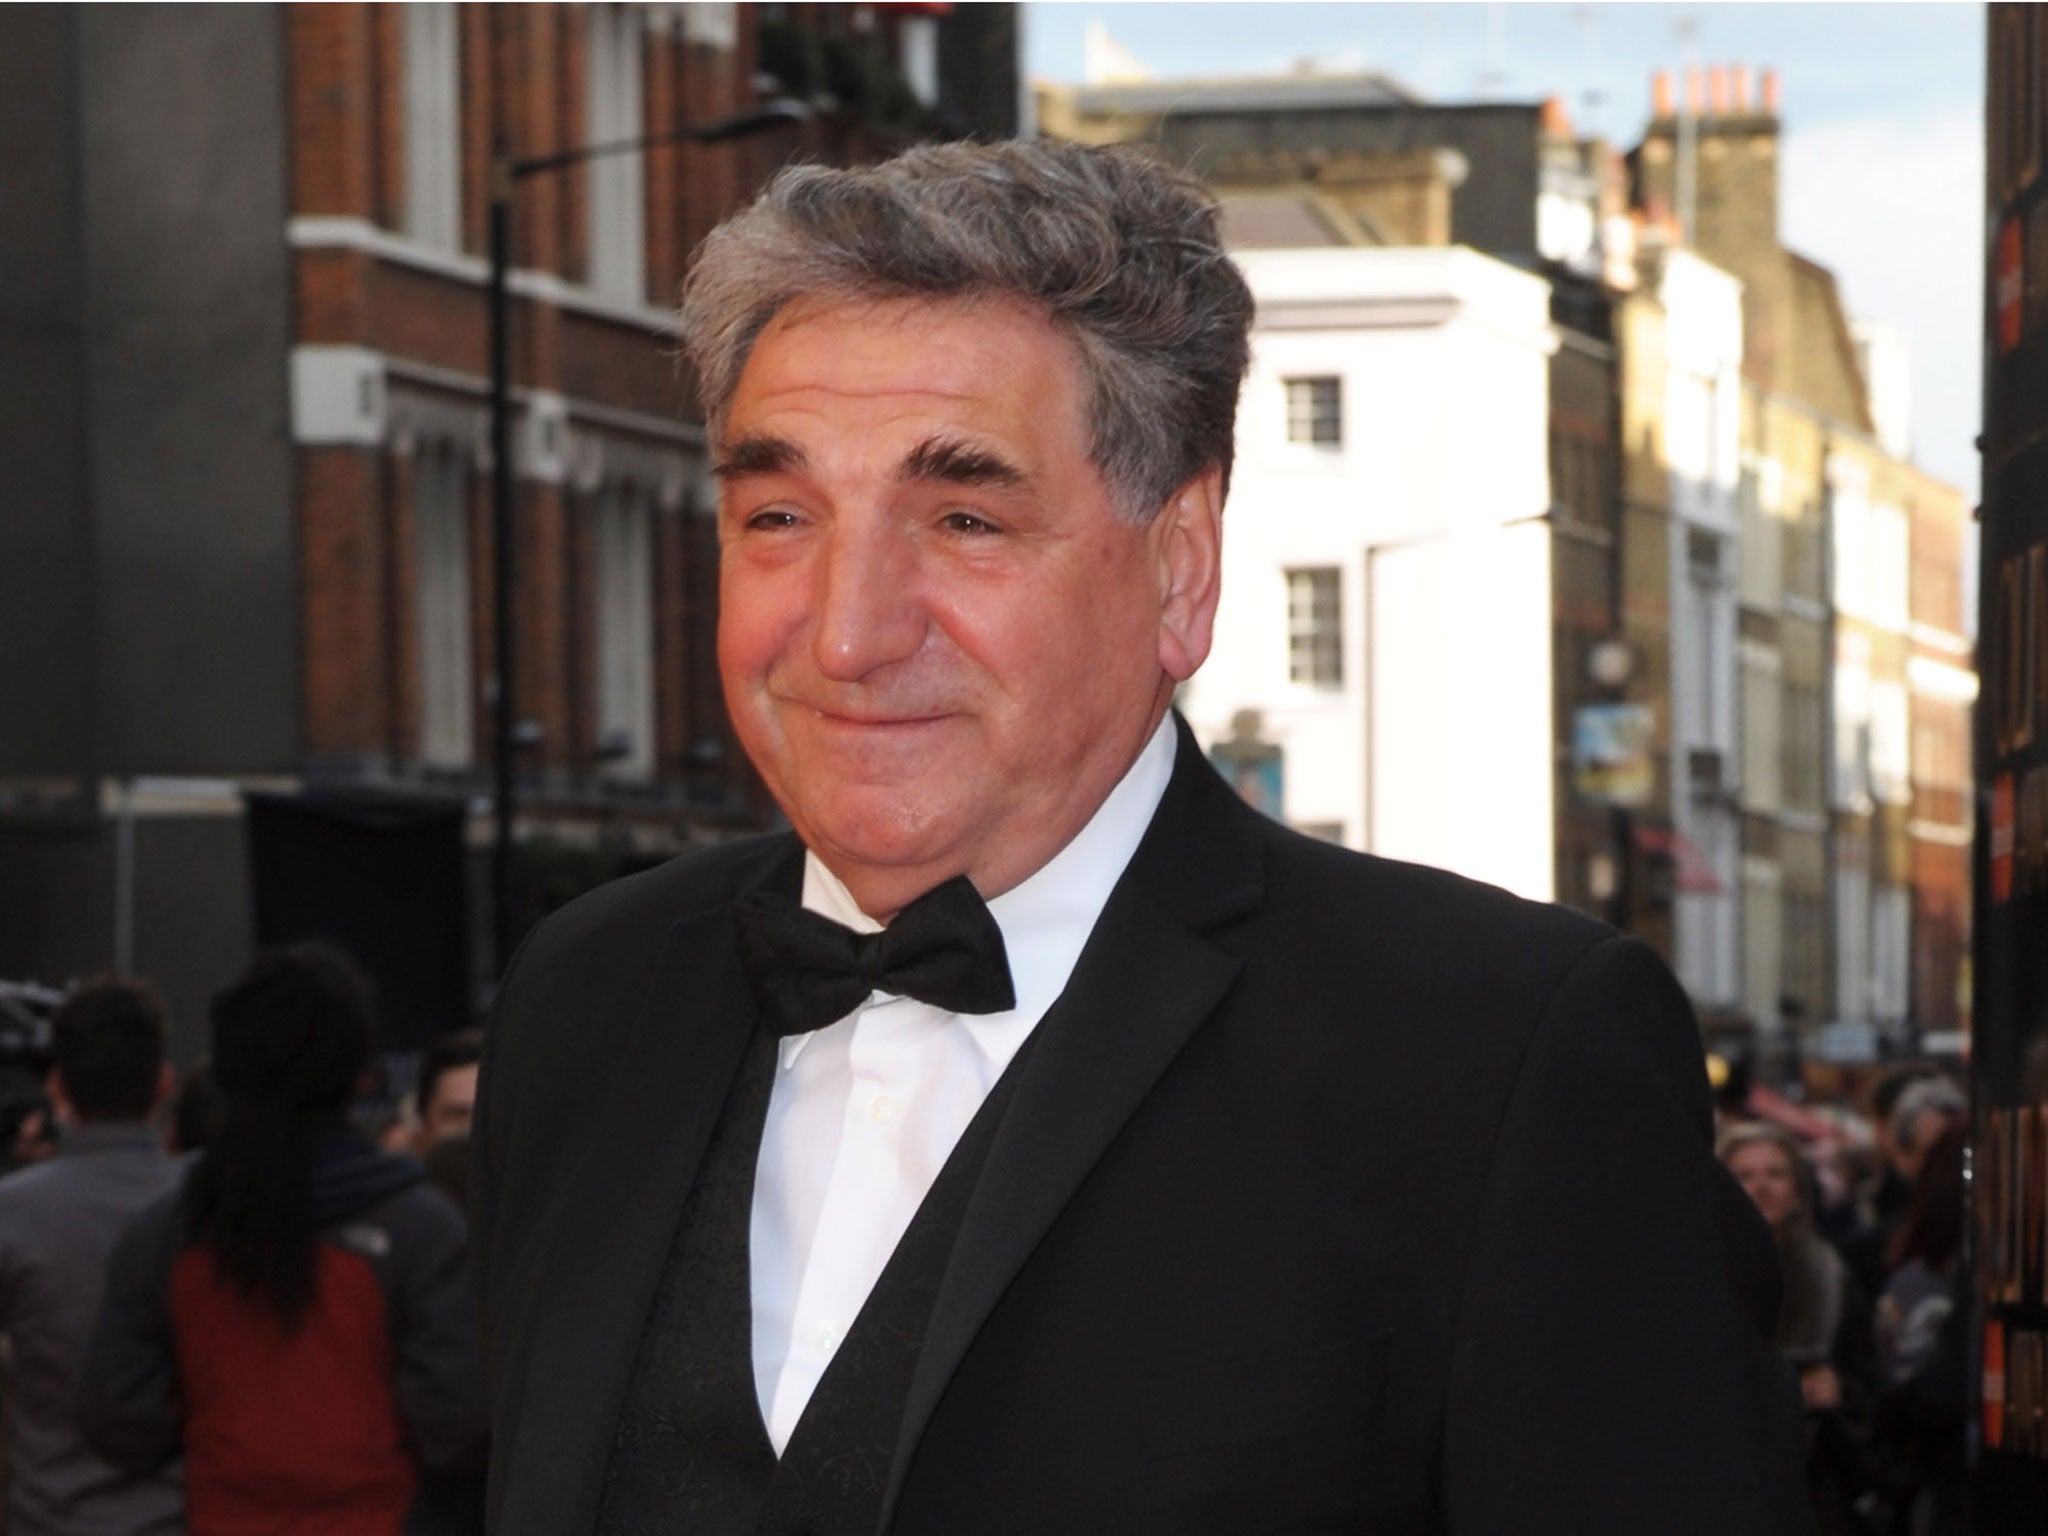 Jim Carter said that, being English, he could not comment